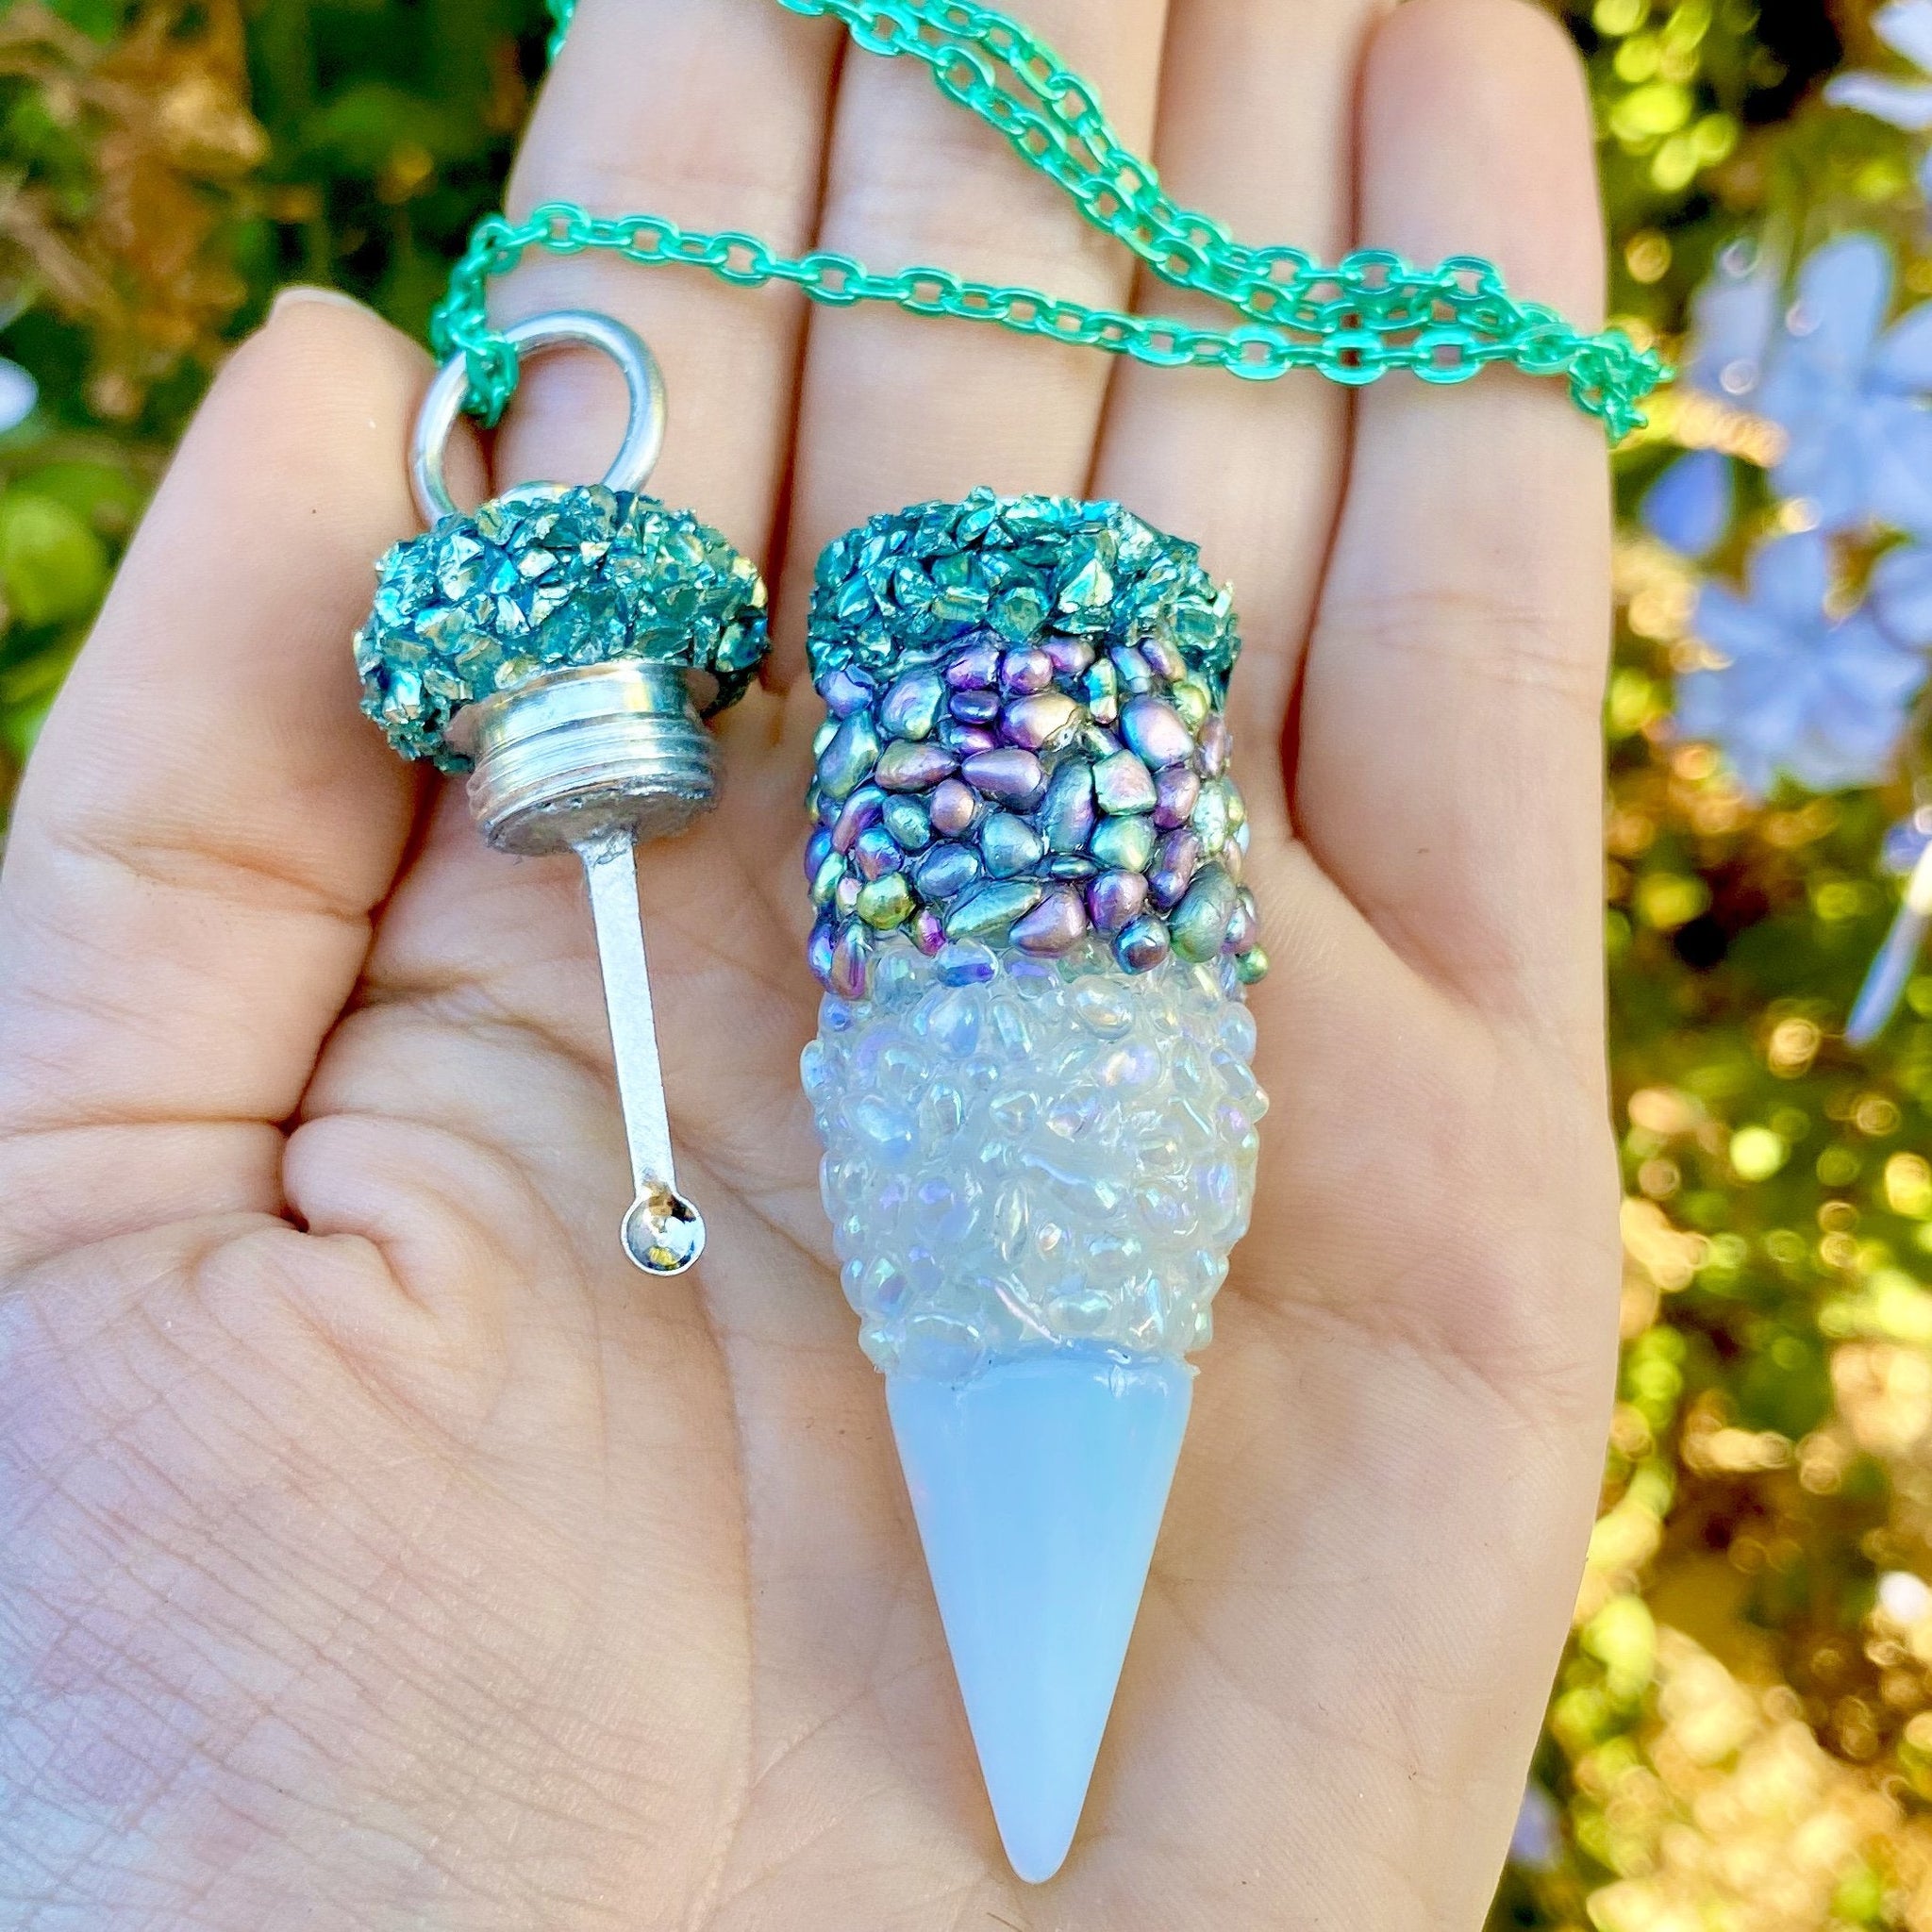 Crystal Stash With Spoon – Rave Fashion